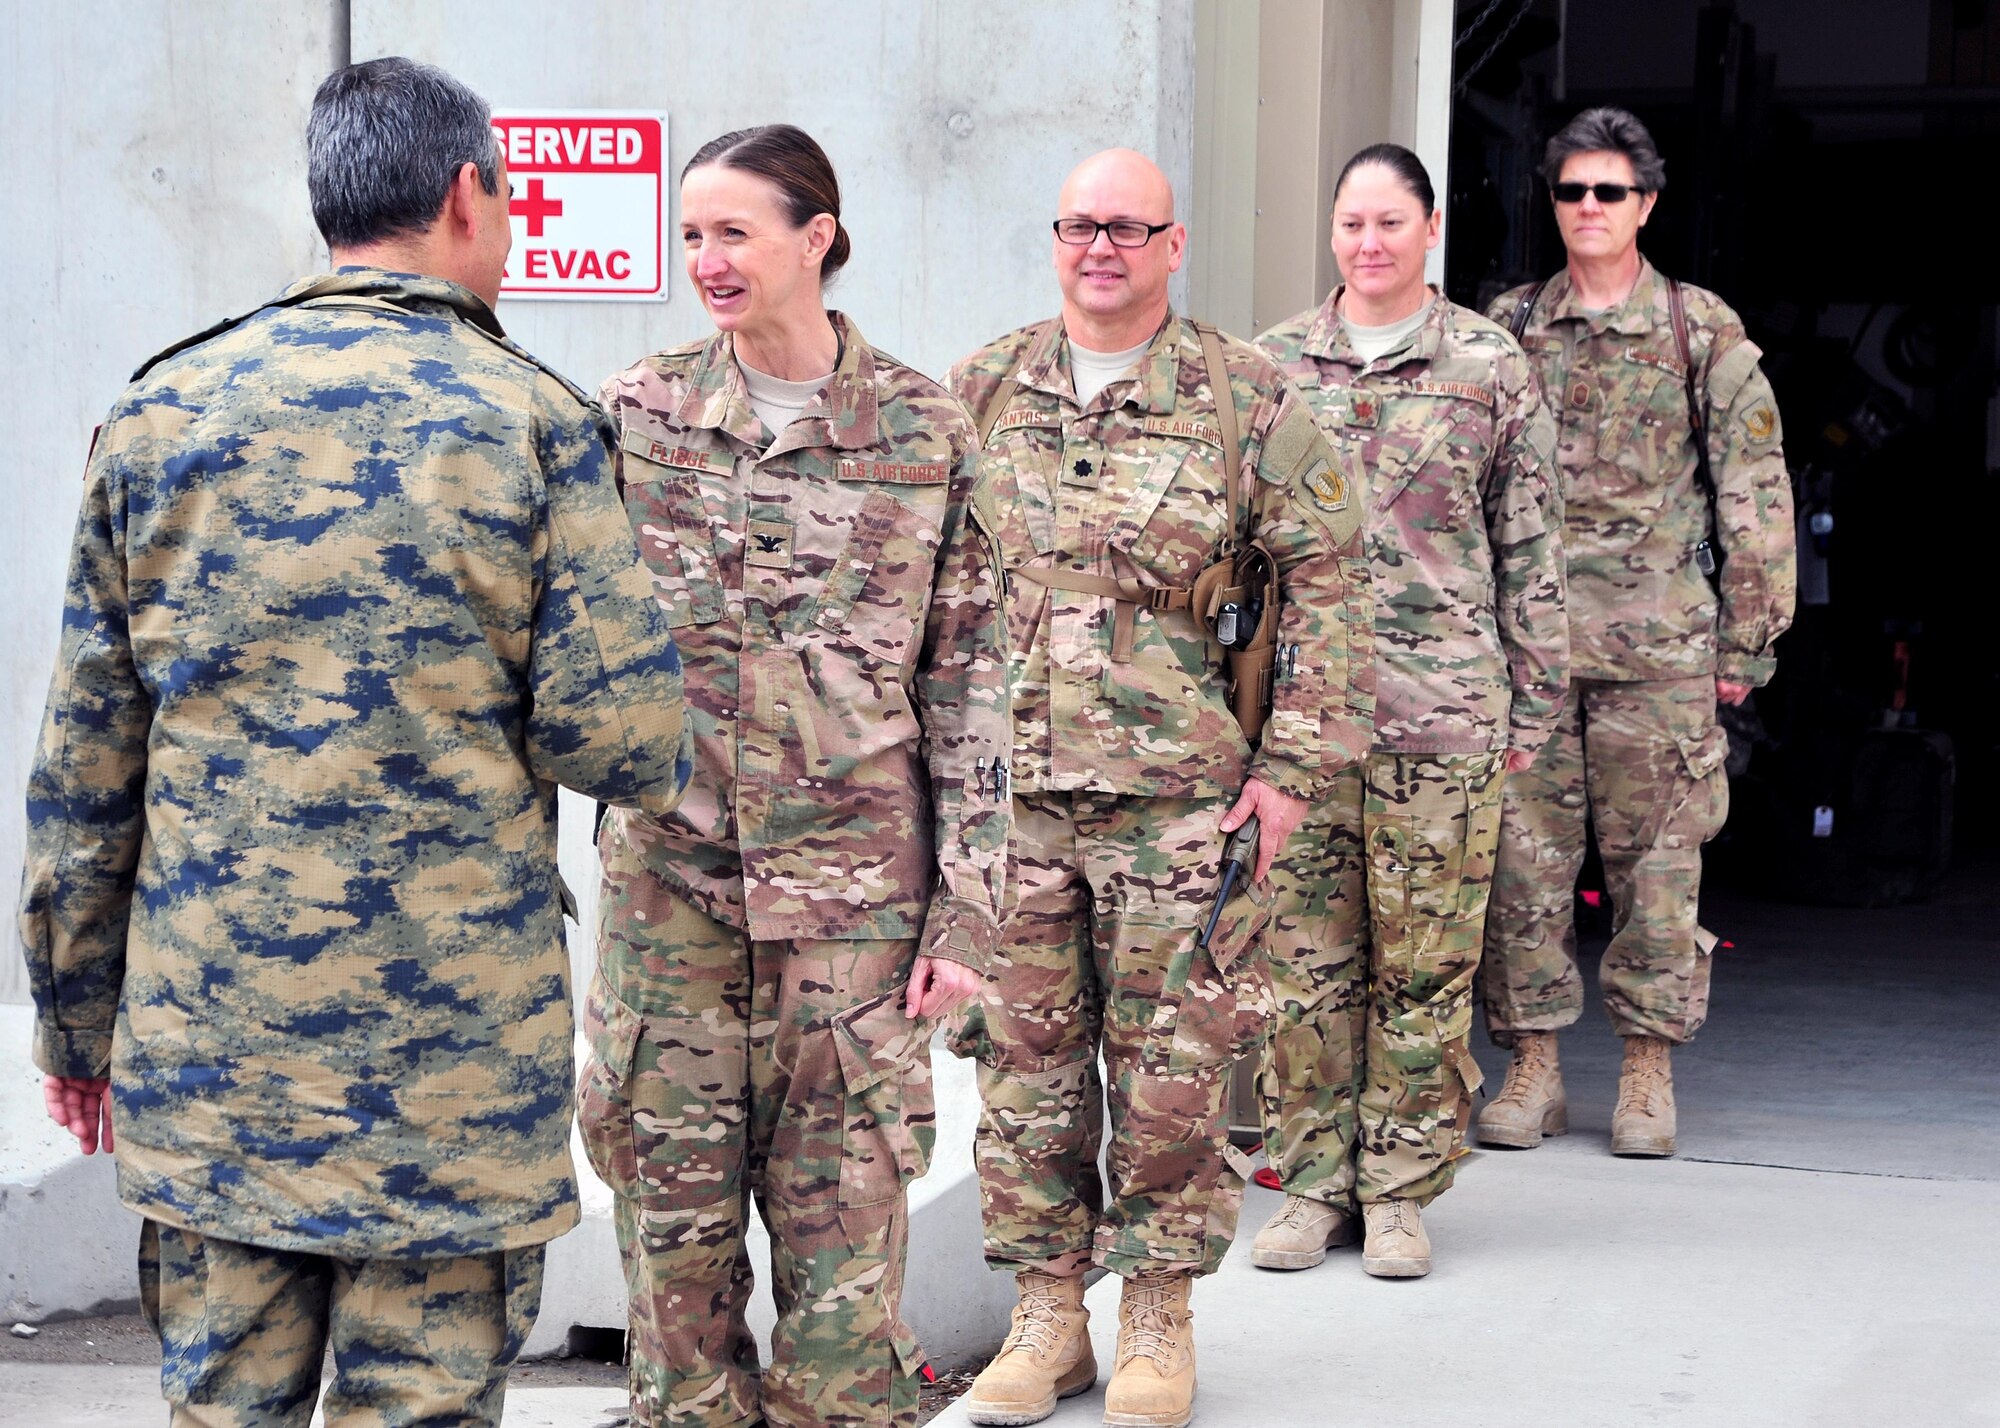 Turkish Air Force Maj. Gen.  Mehmet Cahit Bakir, Commander of Kabul International Airport, shakes hands with U.S. Air Force Col. Anita Fligge, 455th Expeditionary Aeromedical Evacuation Squadron commander, during a tour Jan. 22, 2015 at Bagram Airfield, Afghanistan. During the tour, Bakir had the opportunity to meet with 455th Air Expeditionary Wing leadership and become better acquainted with Air Force assets and squadrons here. (U.S. Air Force photo by Staff Sgt. Whitney Amstutz/released)